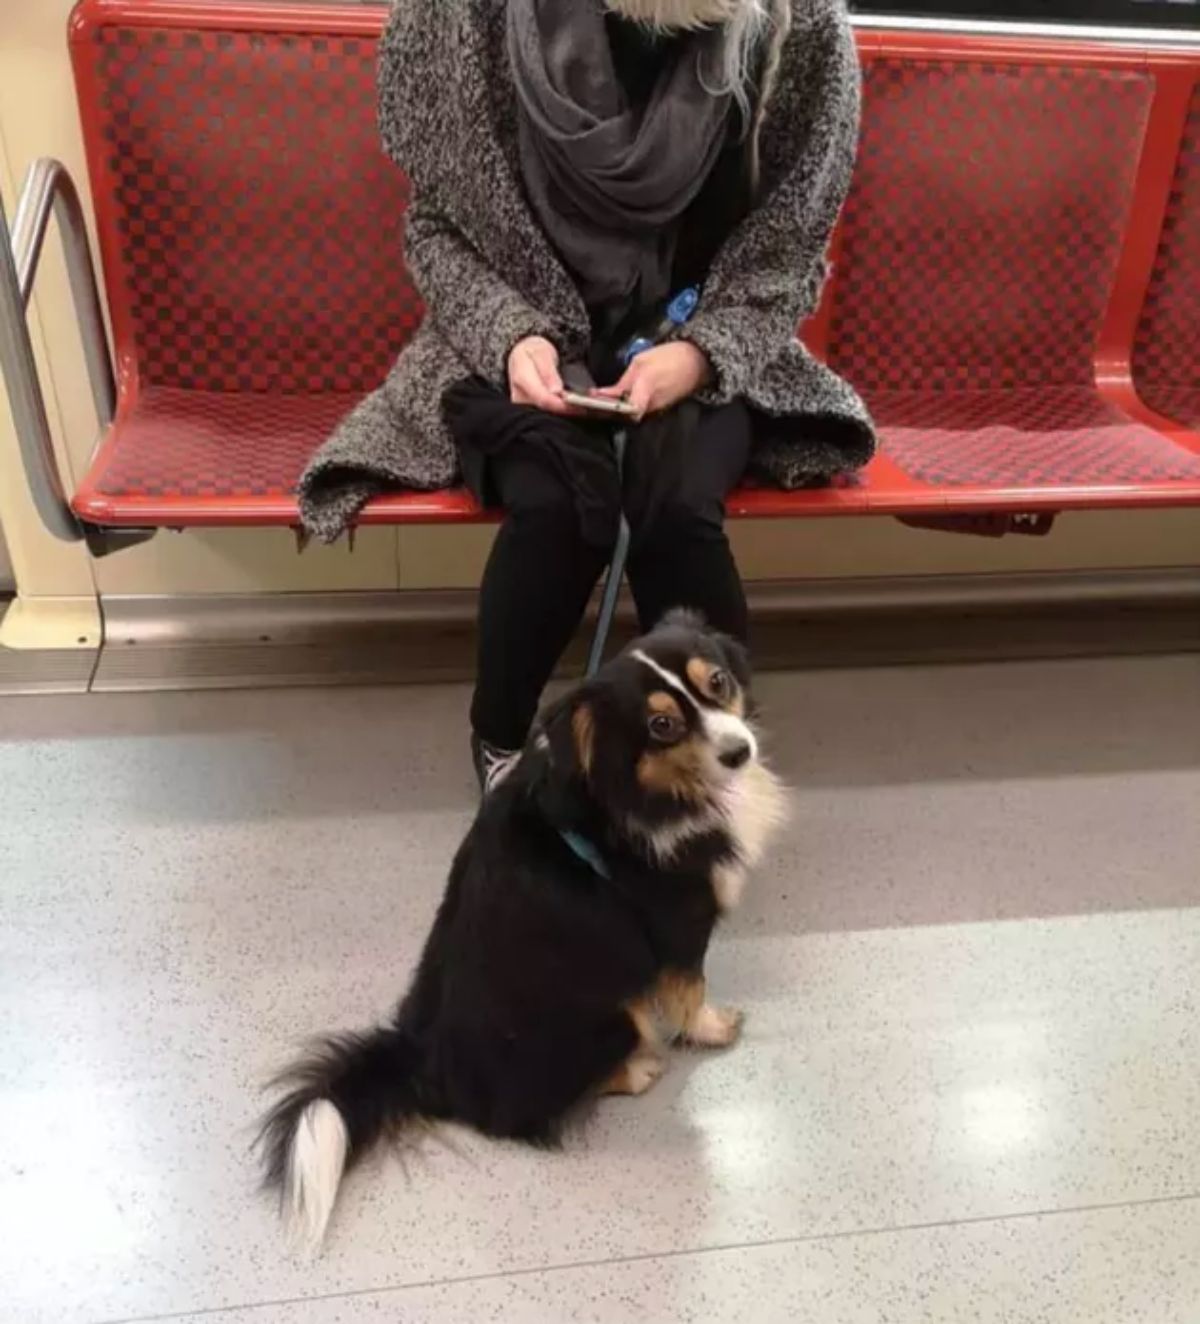 fluffy black white and brown dog on a leash sitting on the floor with a woman sitting on a red train seat